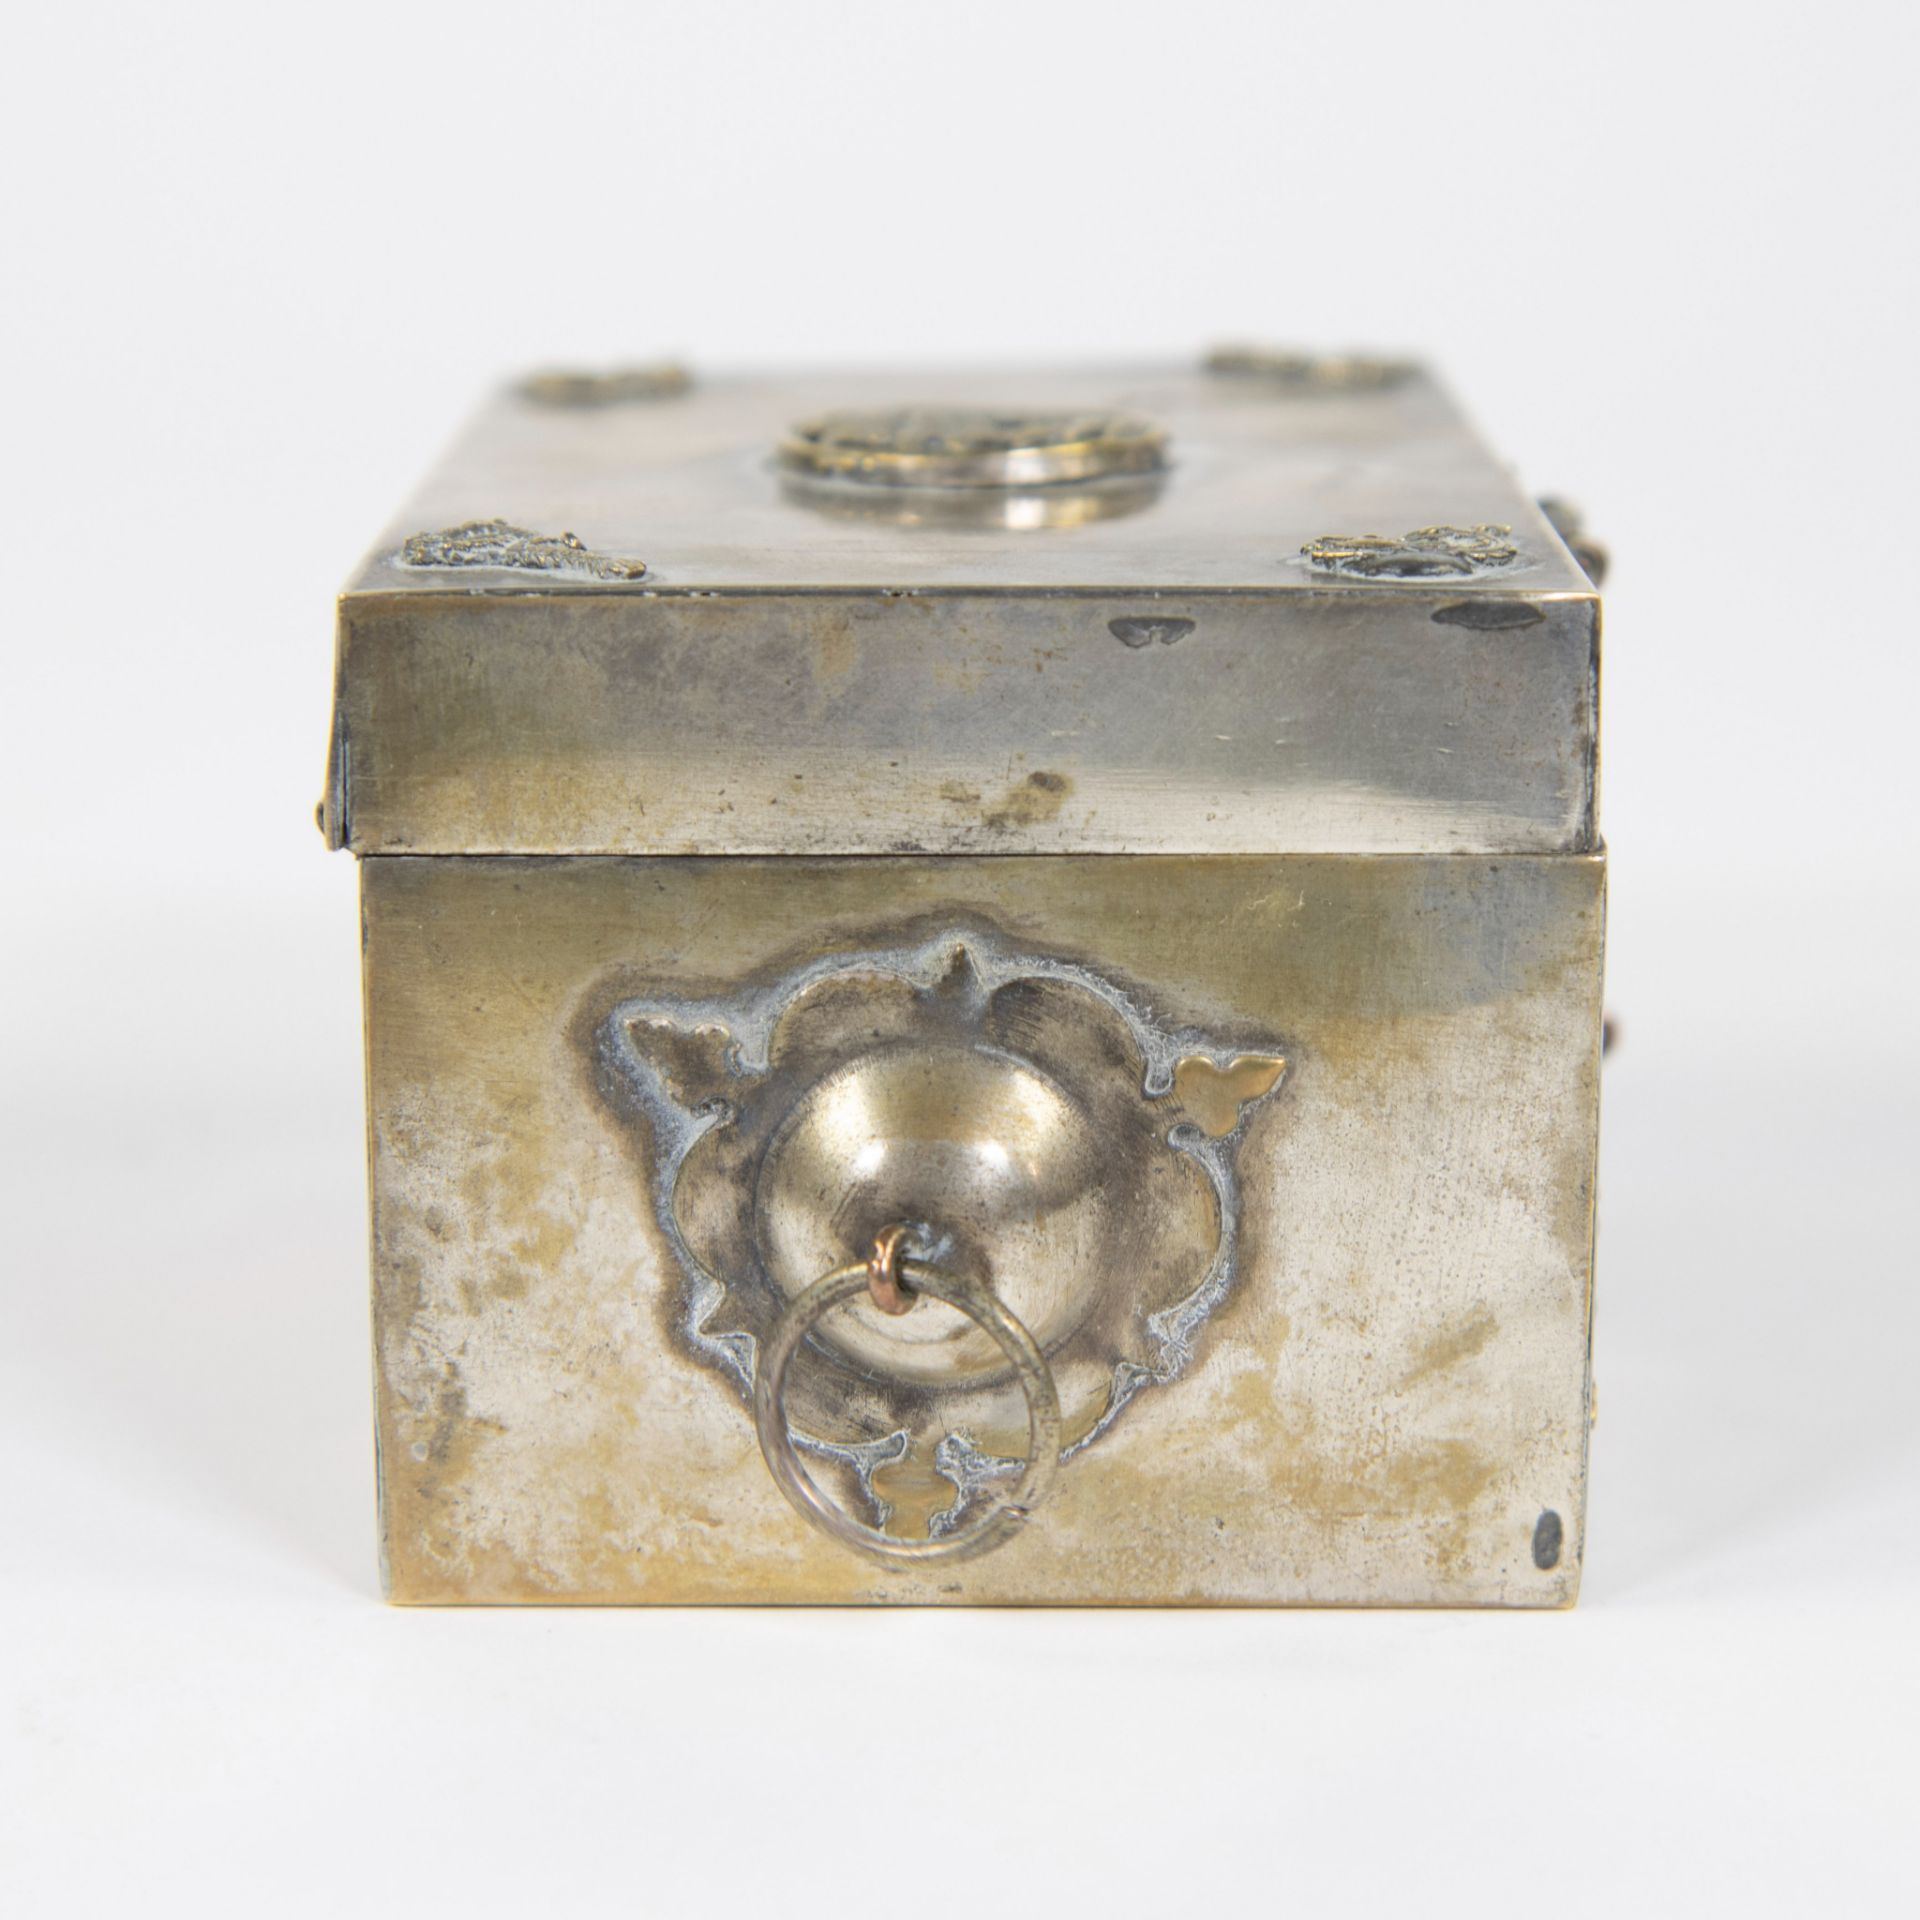 Chinese silver jewelry box - Image 4 of 6